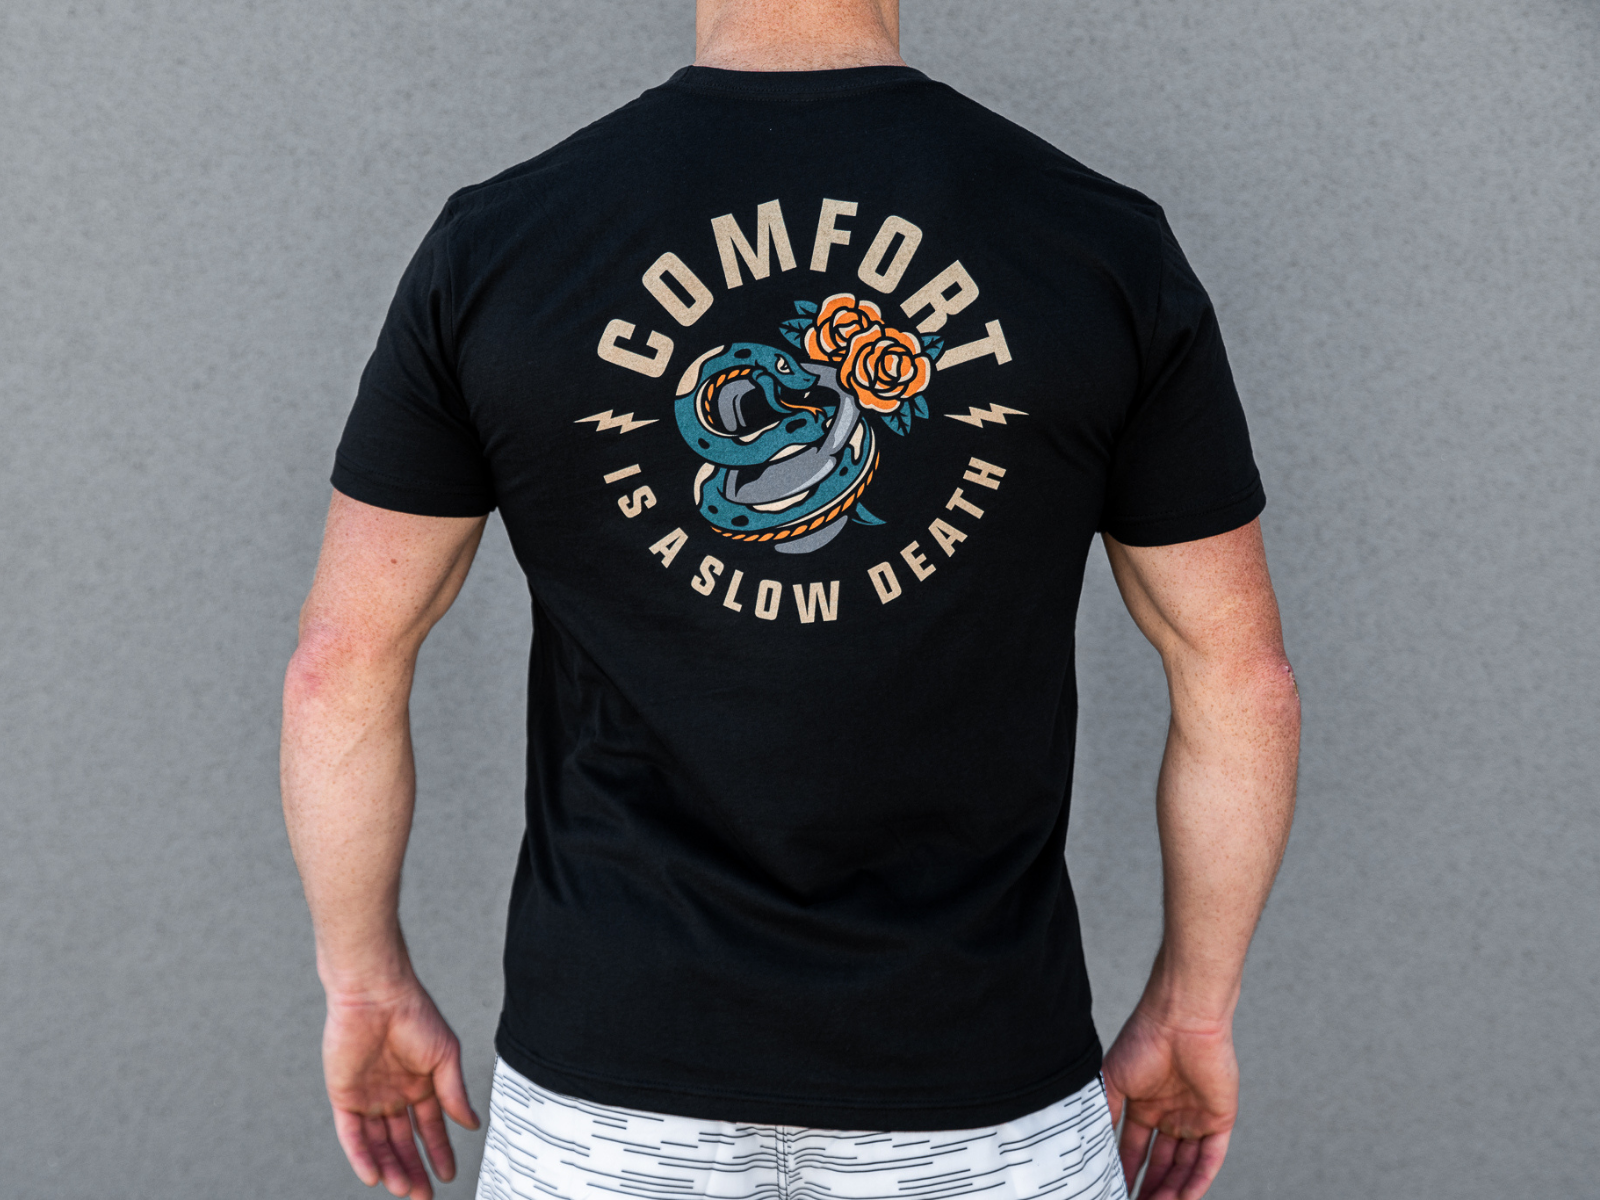 Comfort is a Slow Death T-shirt - Men from 2POOD for Genejack WOD